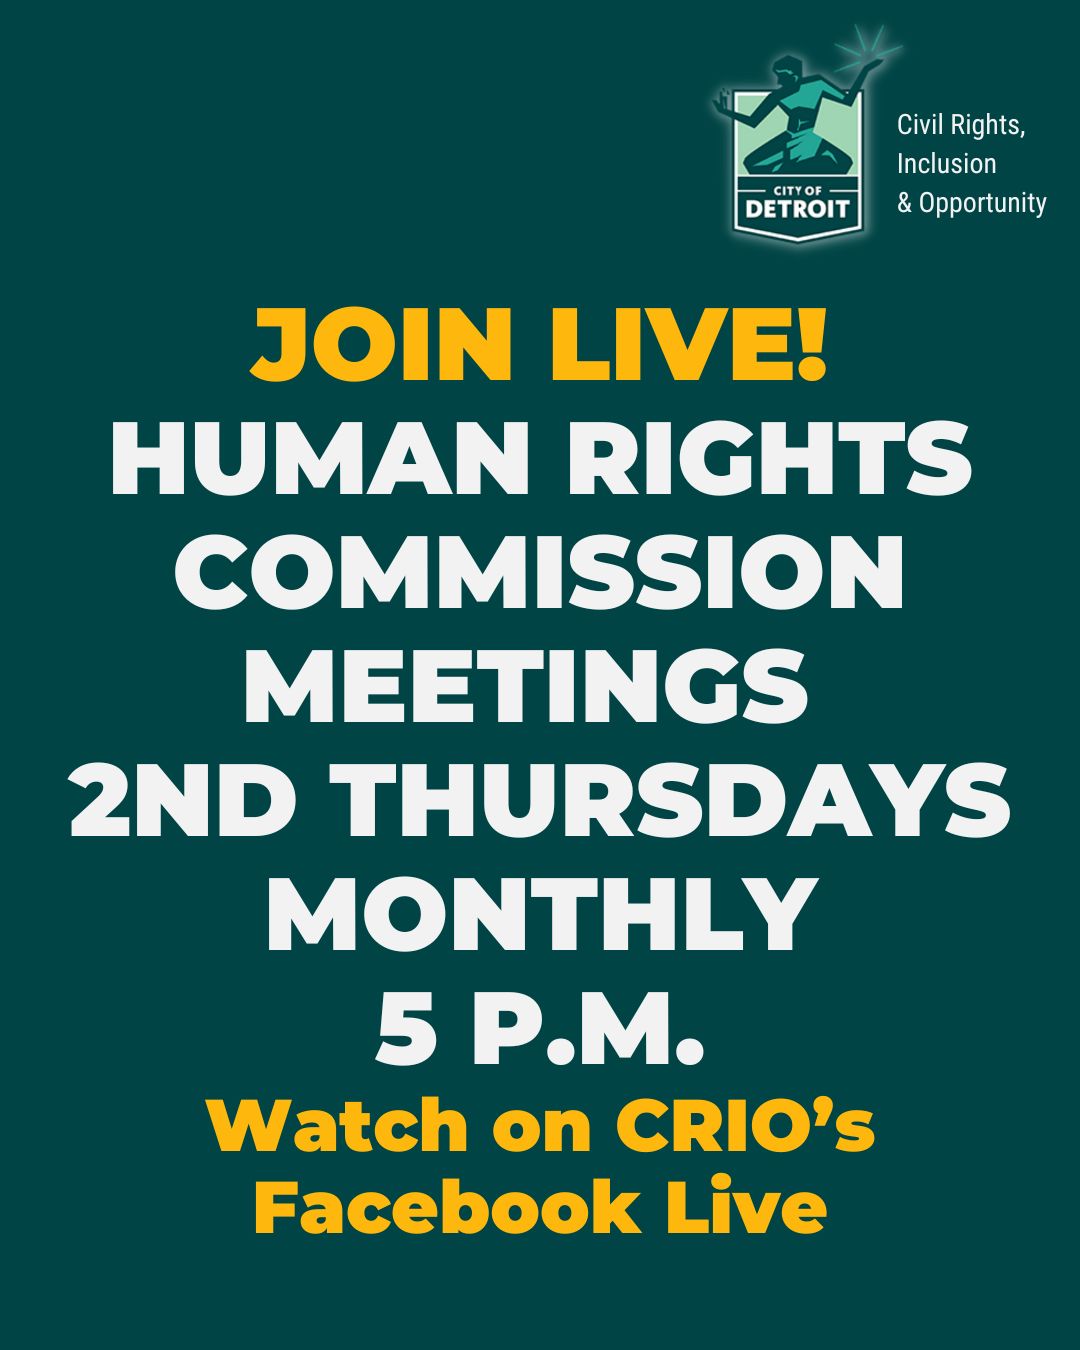 City of Detroit's Human Rights Commission Monthly Meetings